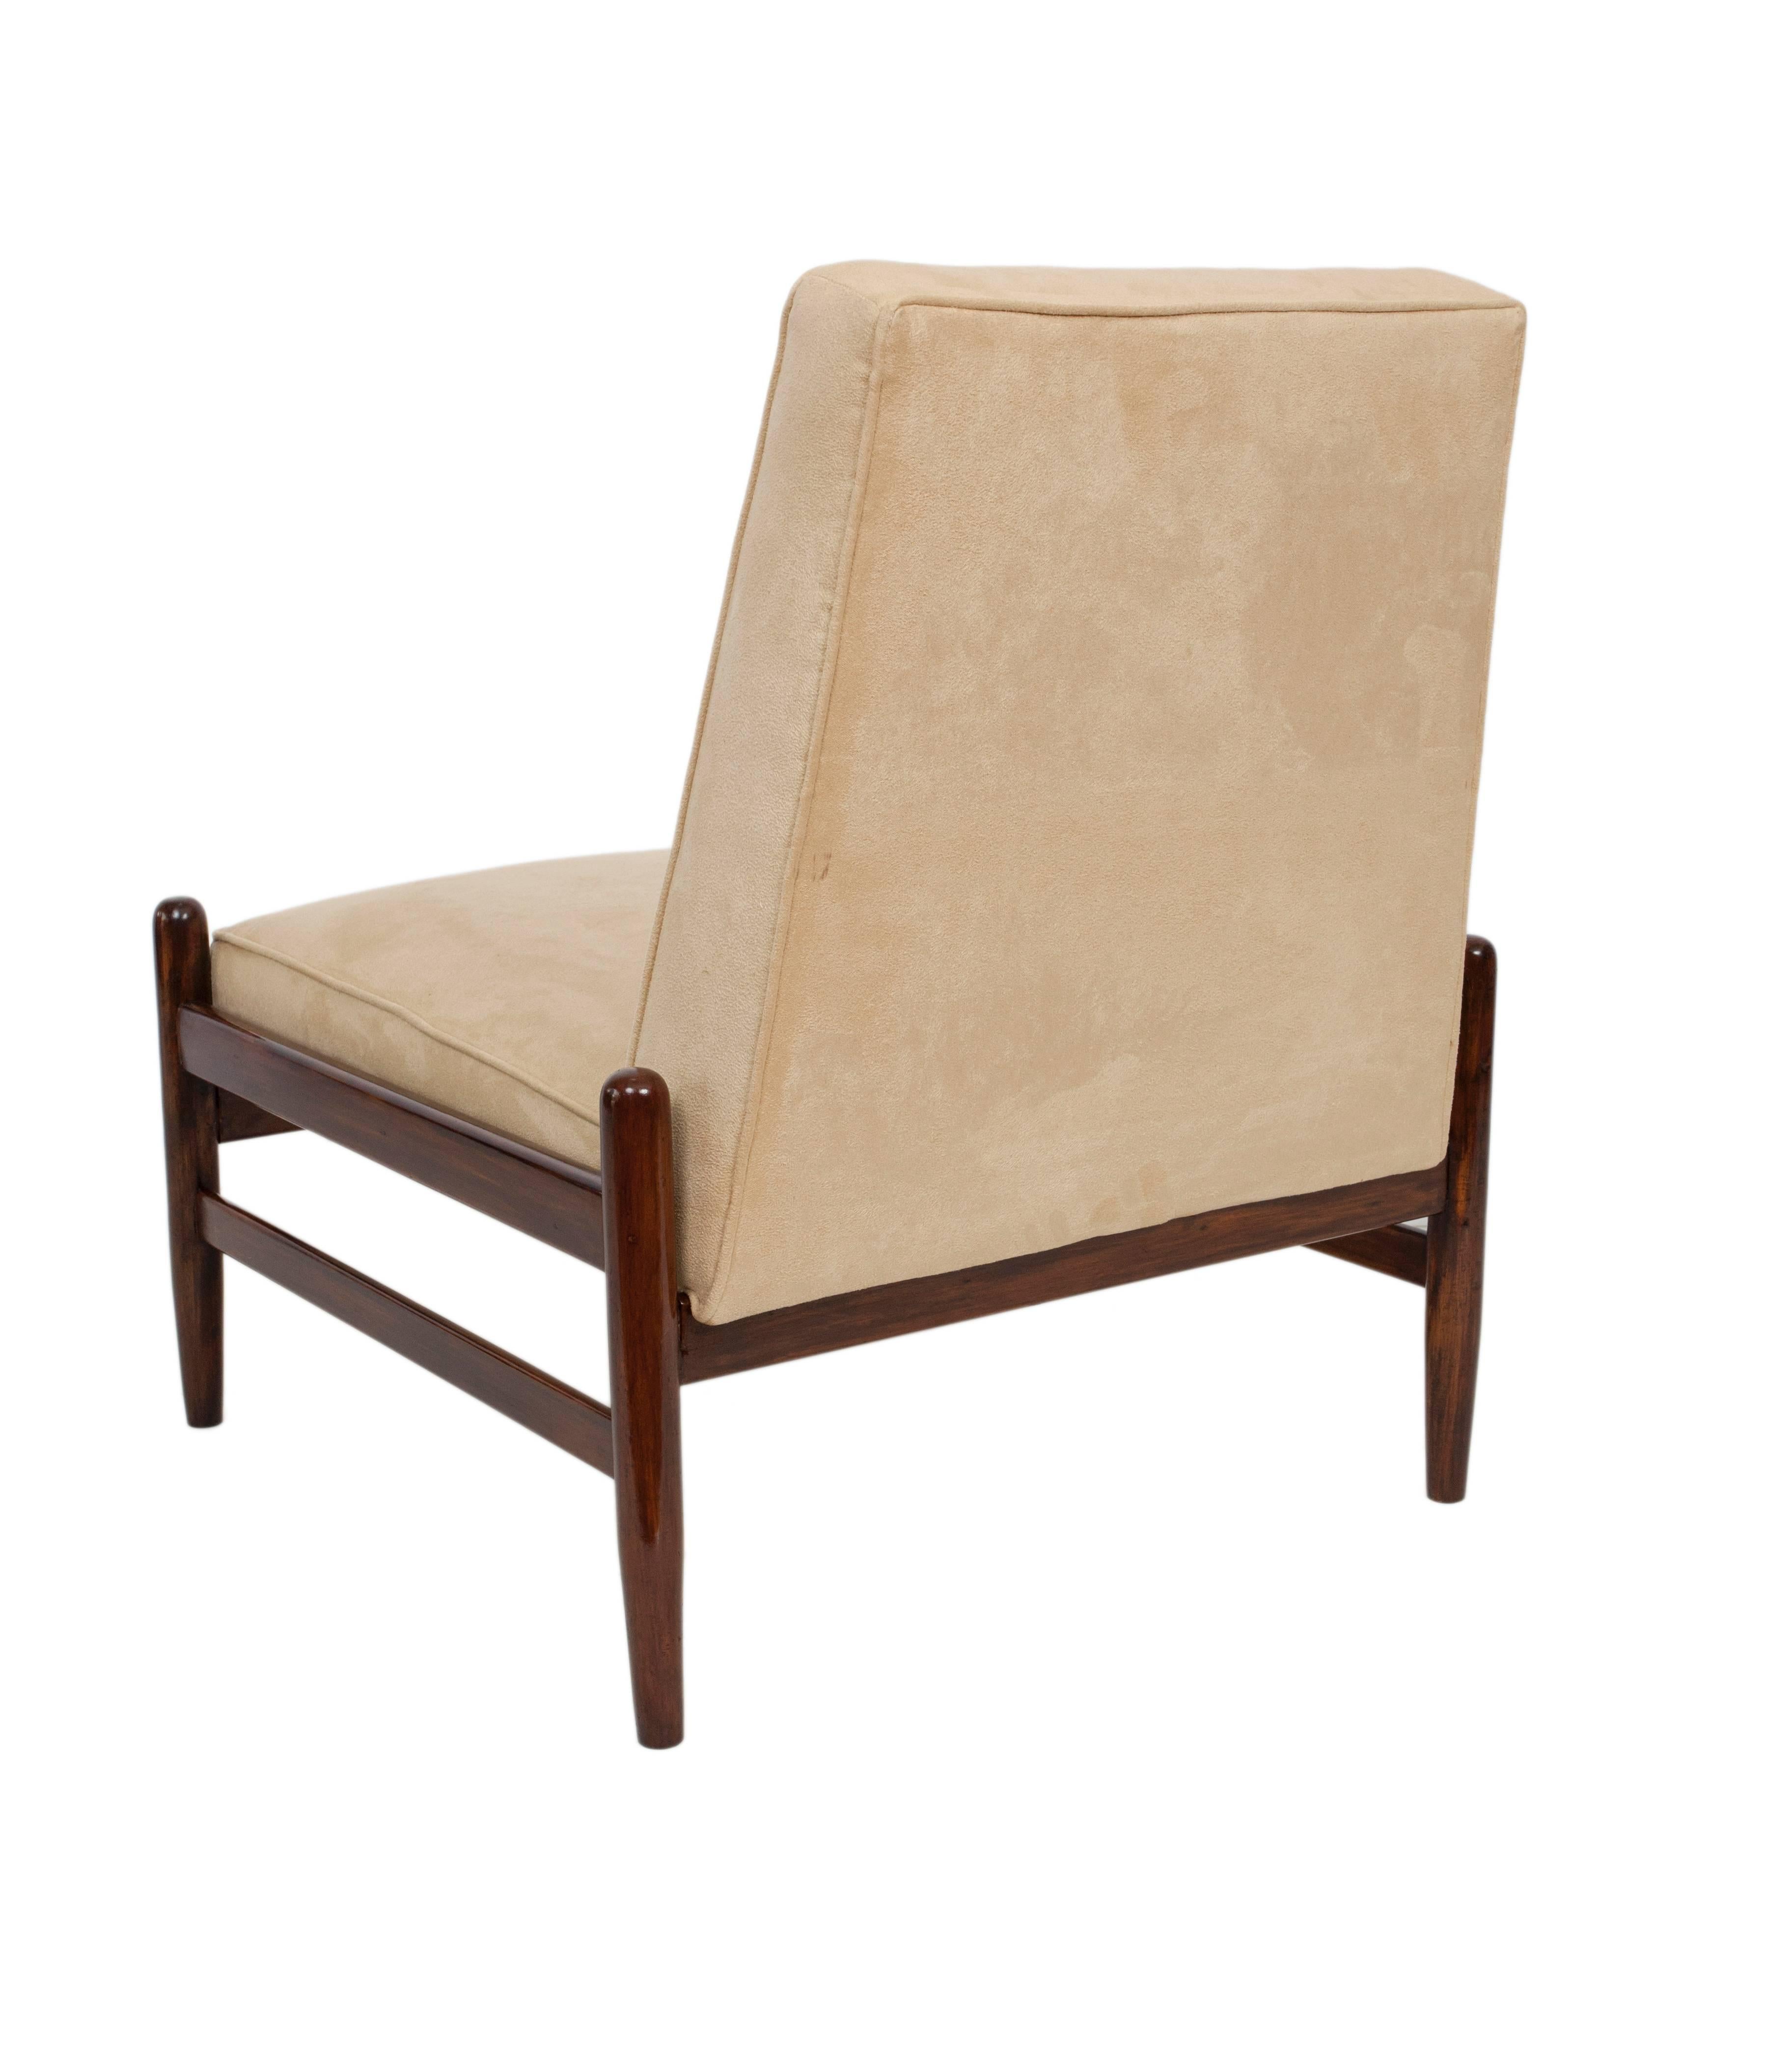 Mid-20th Century Pair of Liceu De Artes & Oficios Lounge Chairs in Faux Suede and Jacaranda